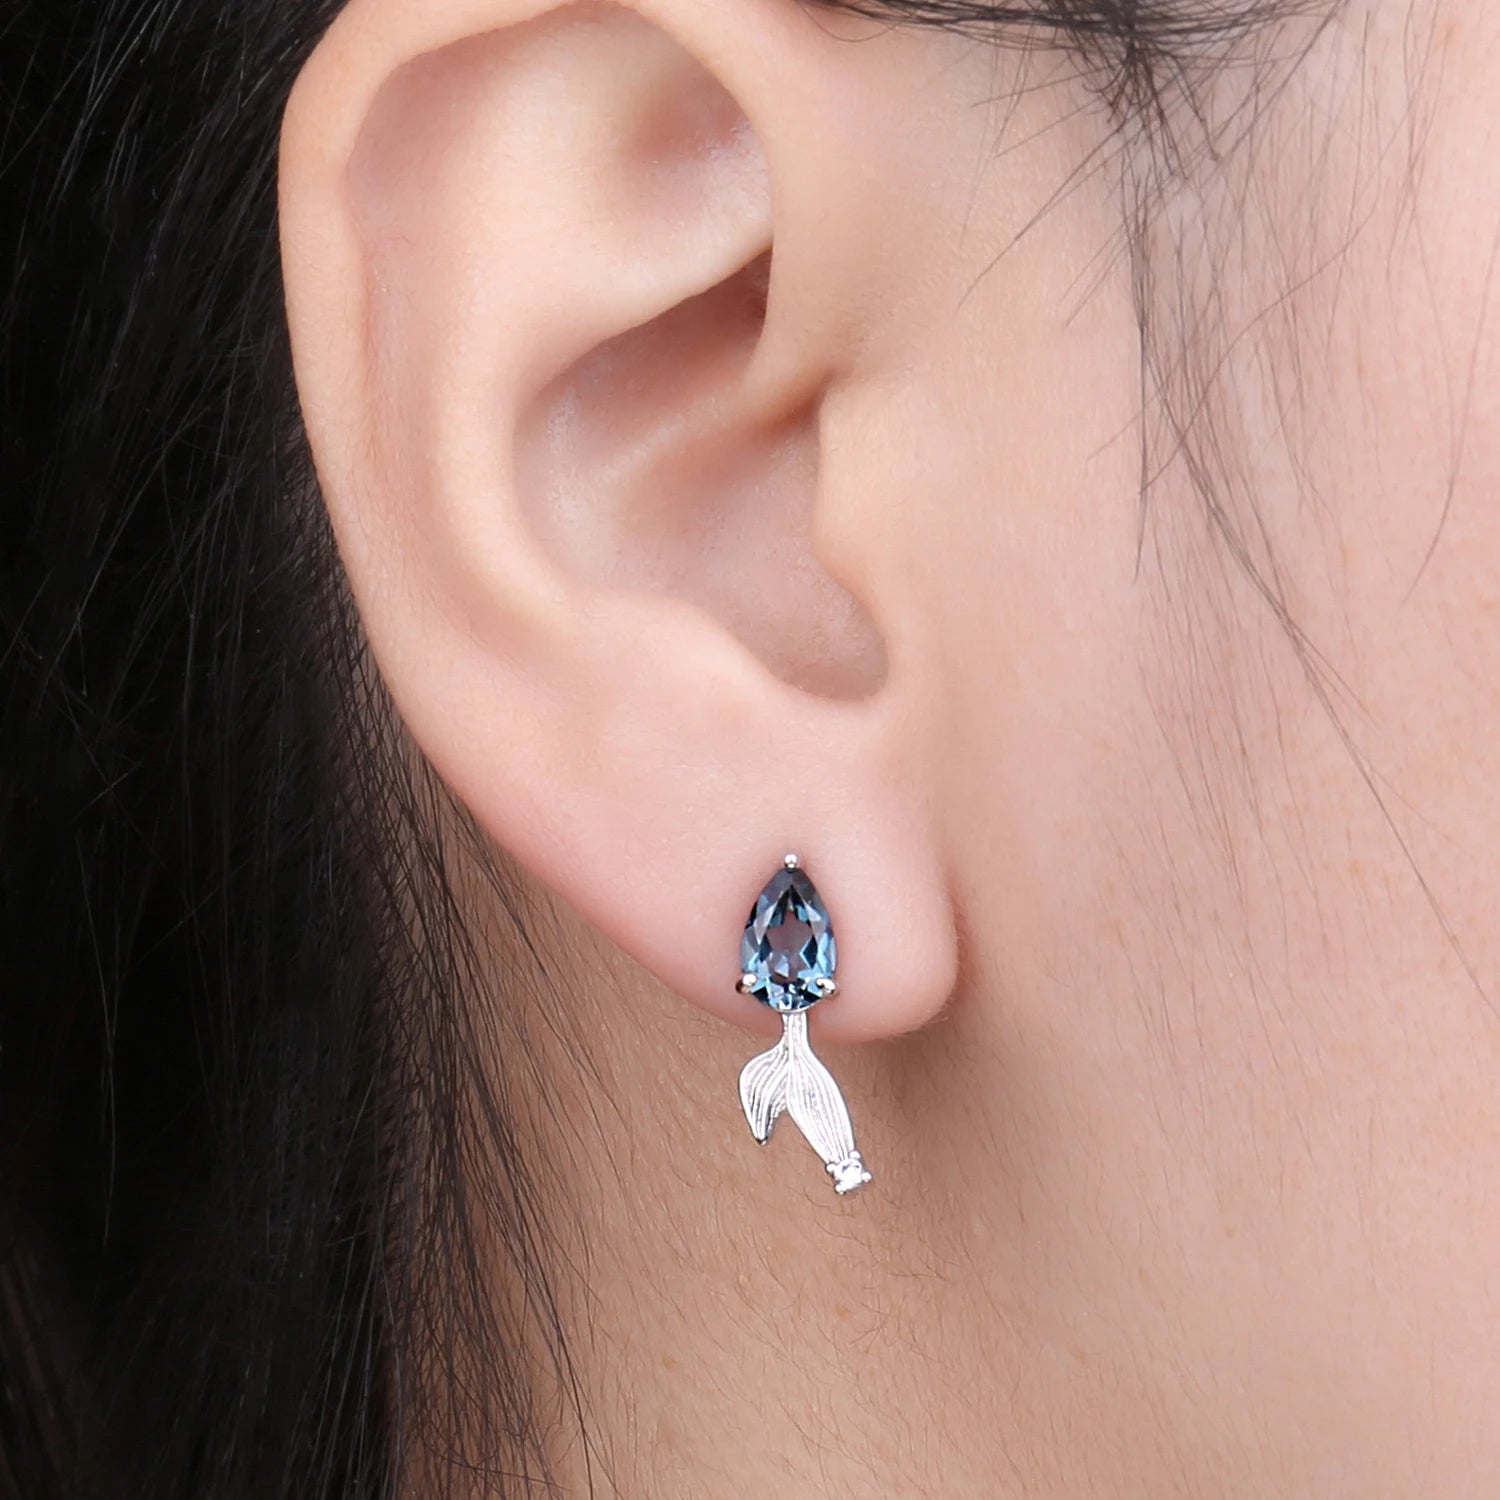 JewelryPalace New Arrival Luxury Pisces Fish Pear Genuine Sky And London Blue Topaz 925 Sterling Silver Stud Earrings for Woman